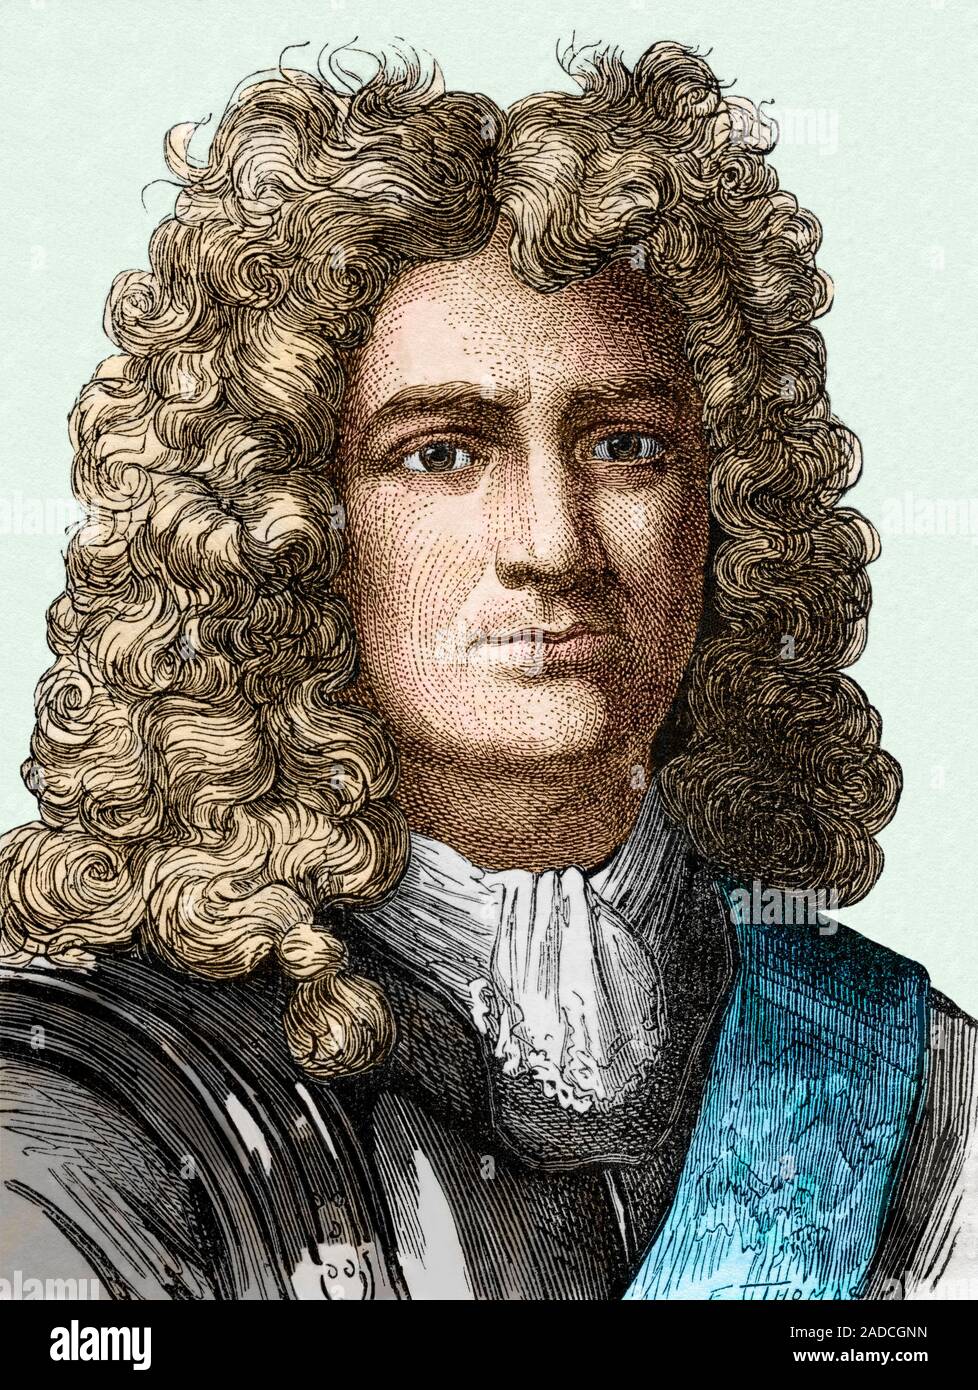 Sébastien Le Prestre de Vauban (1633-1707), French military engineer who revolutionized the art of siege craft and was responsible for the fortificati Stock Photo